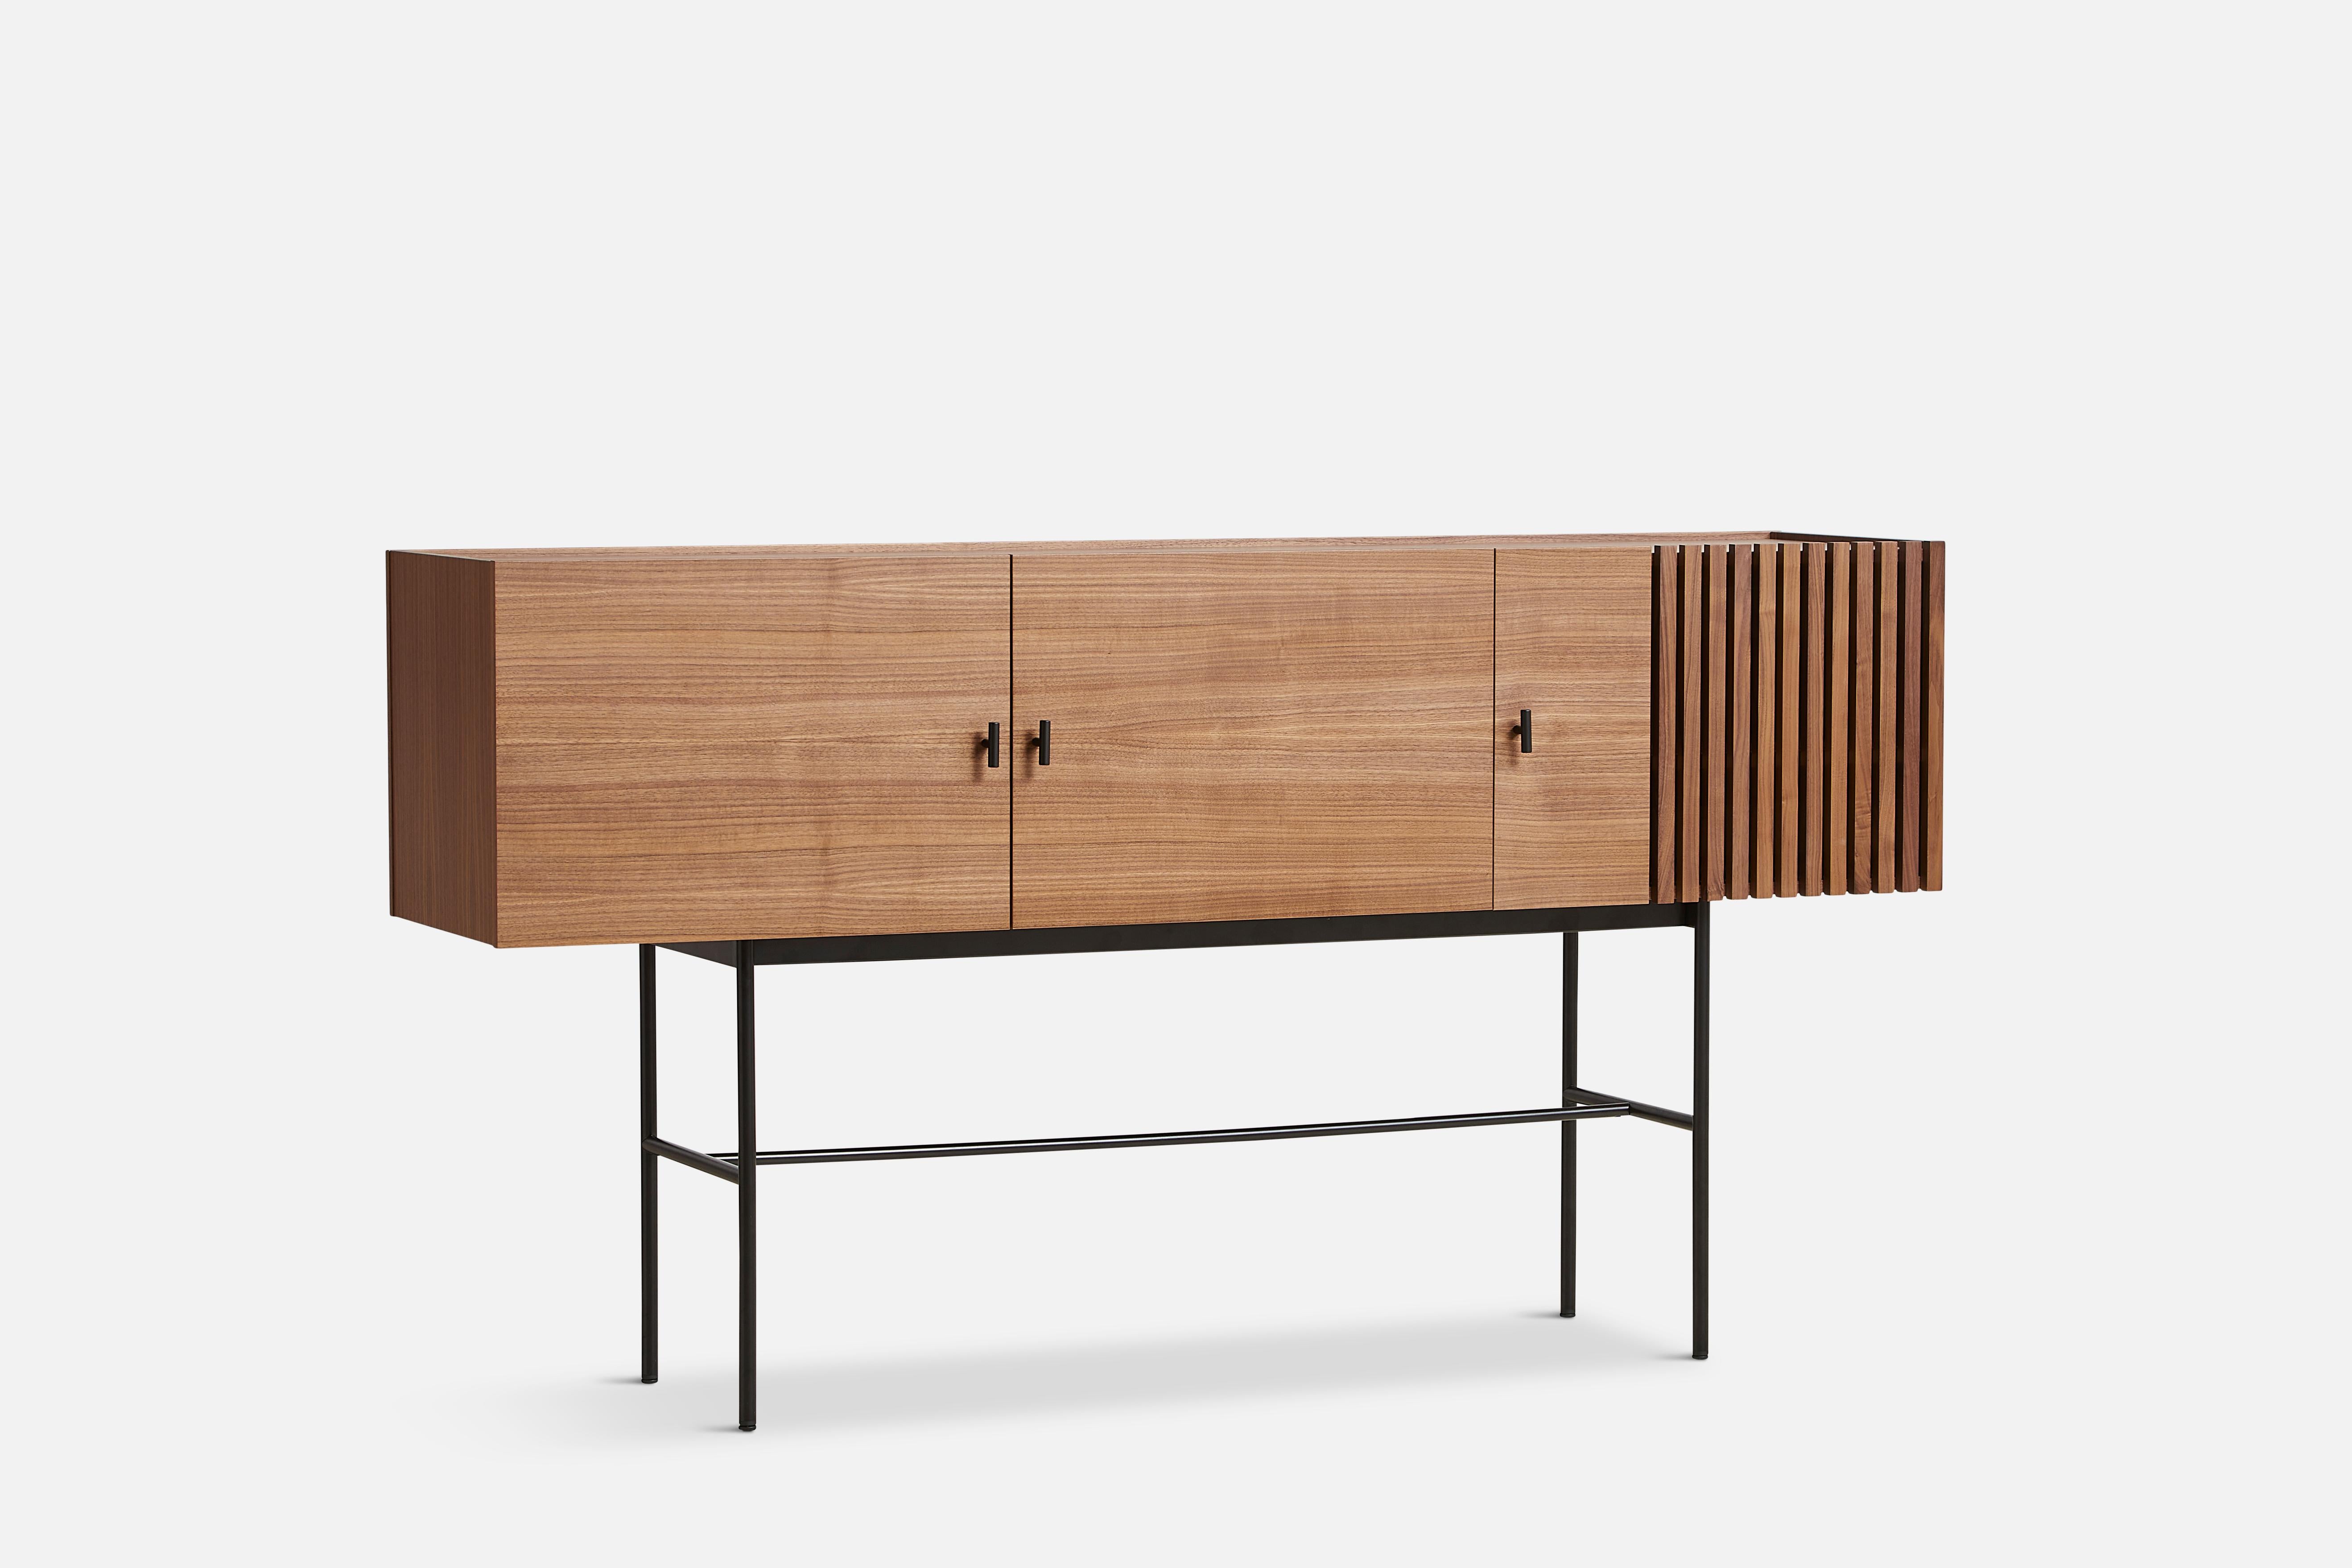 Walnut array sideboard 180 by Says Who
Materials: walnut, metal.
Dimensions: D 44 x W 180 x H 97 cm.
Also available in different colours and materials. 

The founders, Mia and Torben Koed, decided to put their 30 years of experience into a new